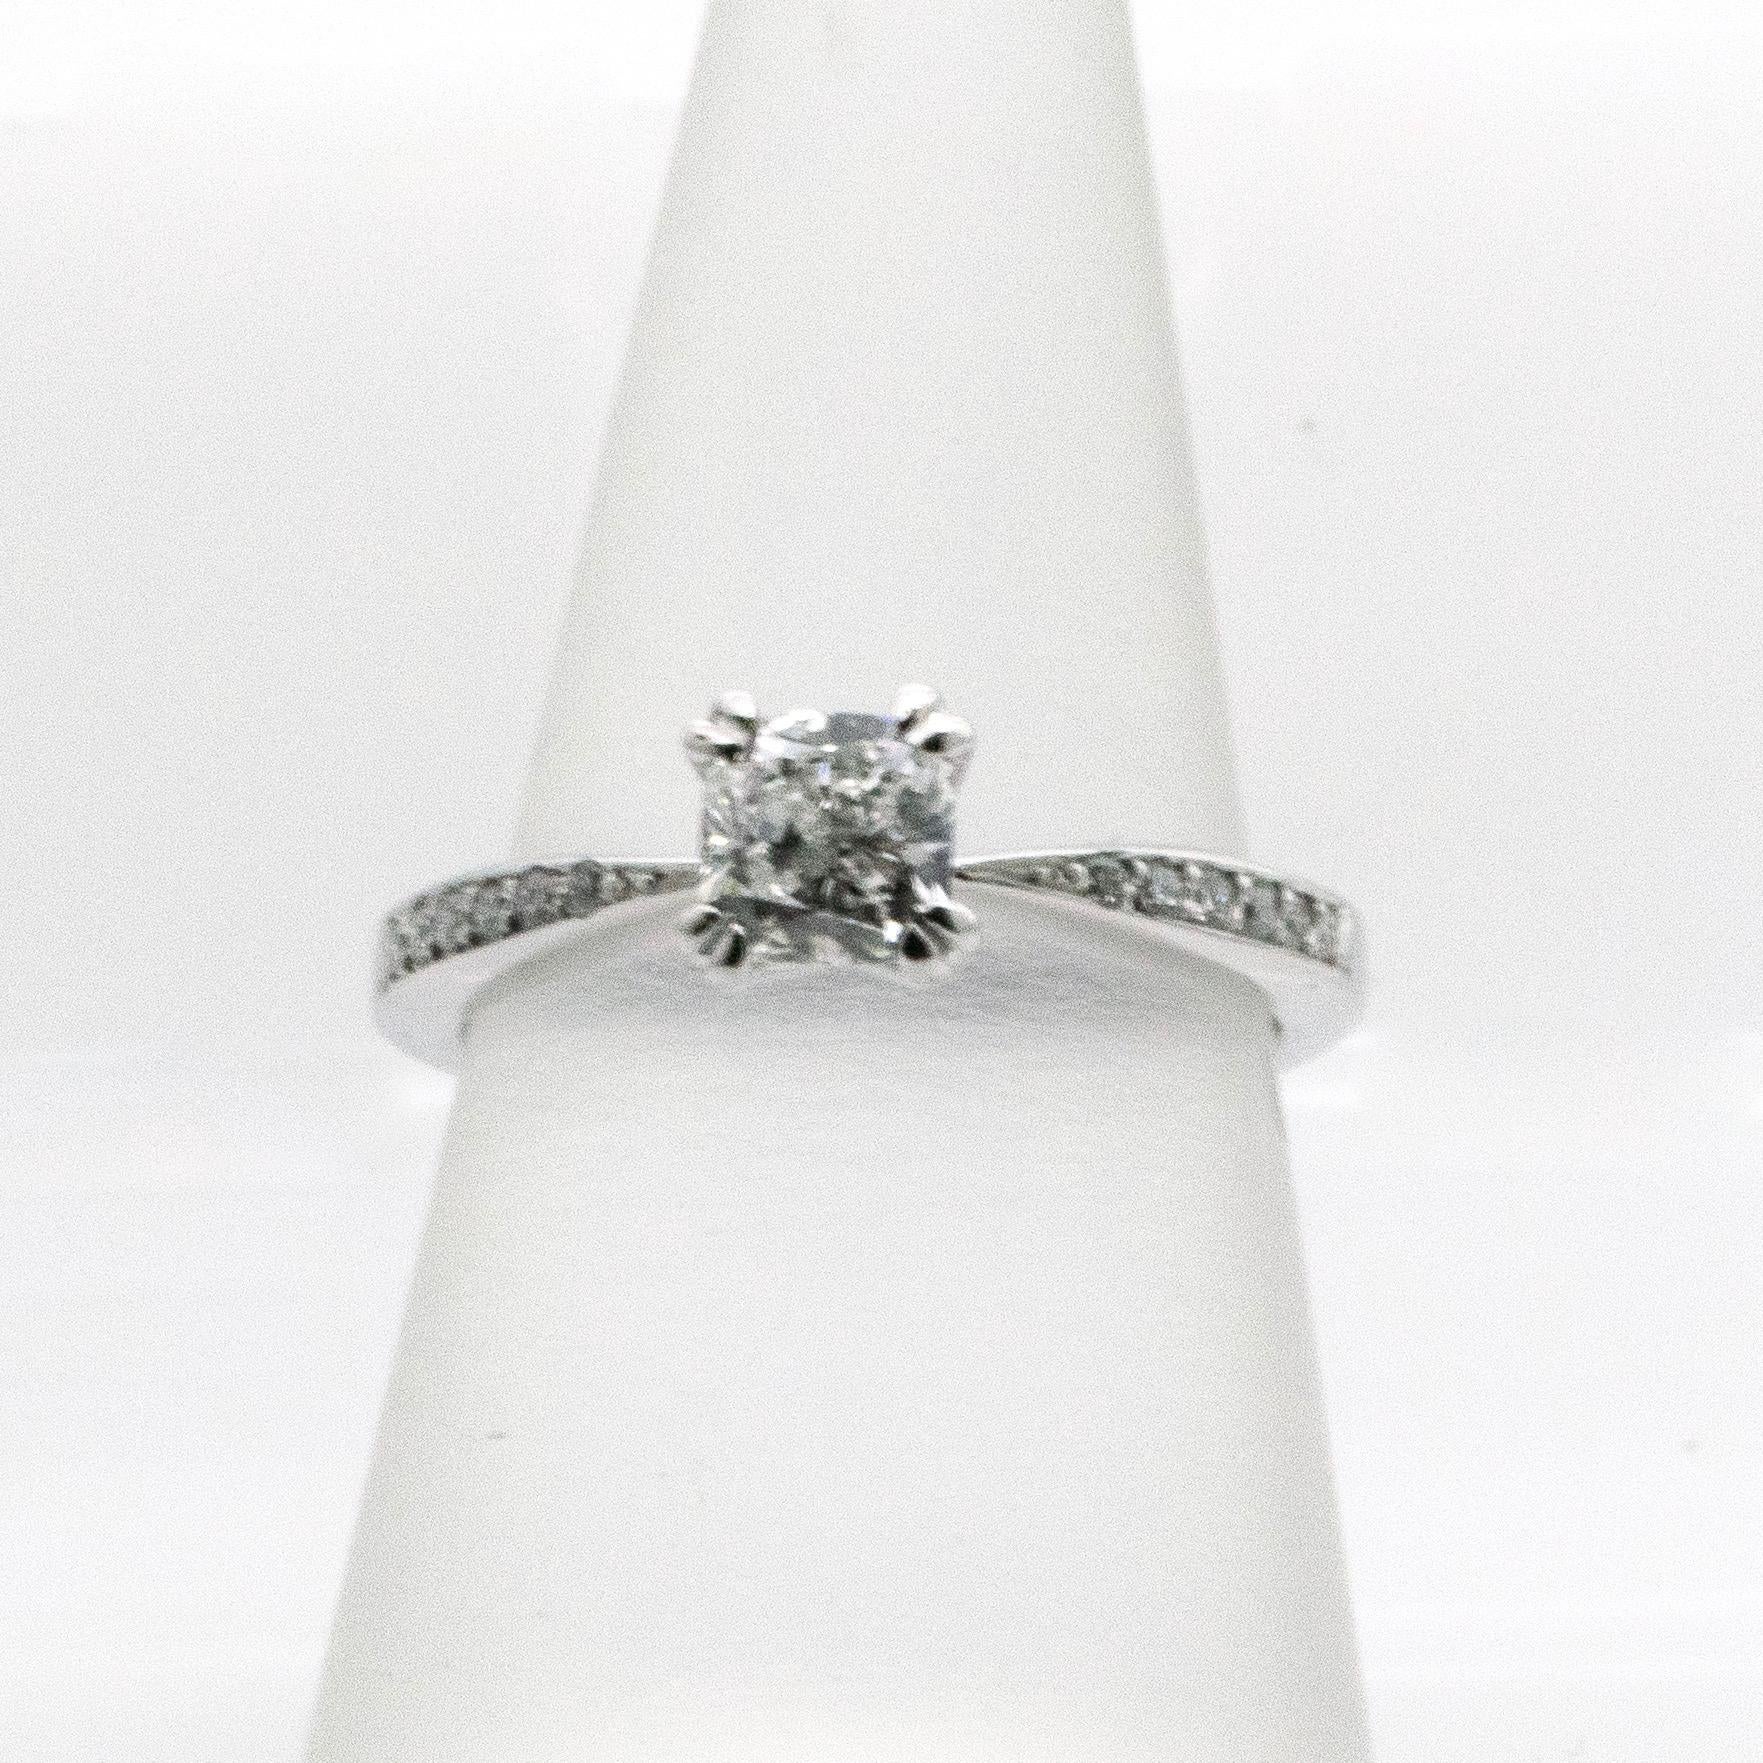 Contemporary White Gold Engagement Ring Claw Set with One Cushion Cut Diamond 0.72 Carats